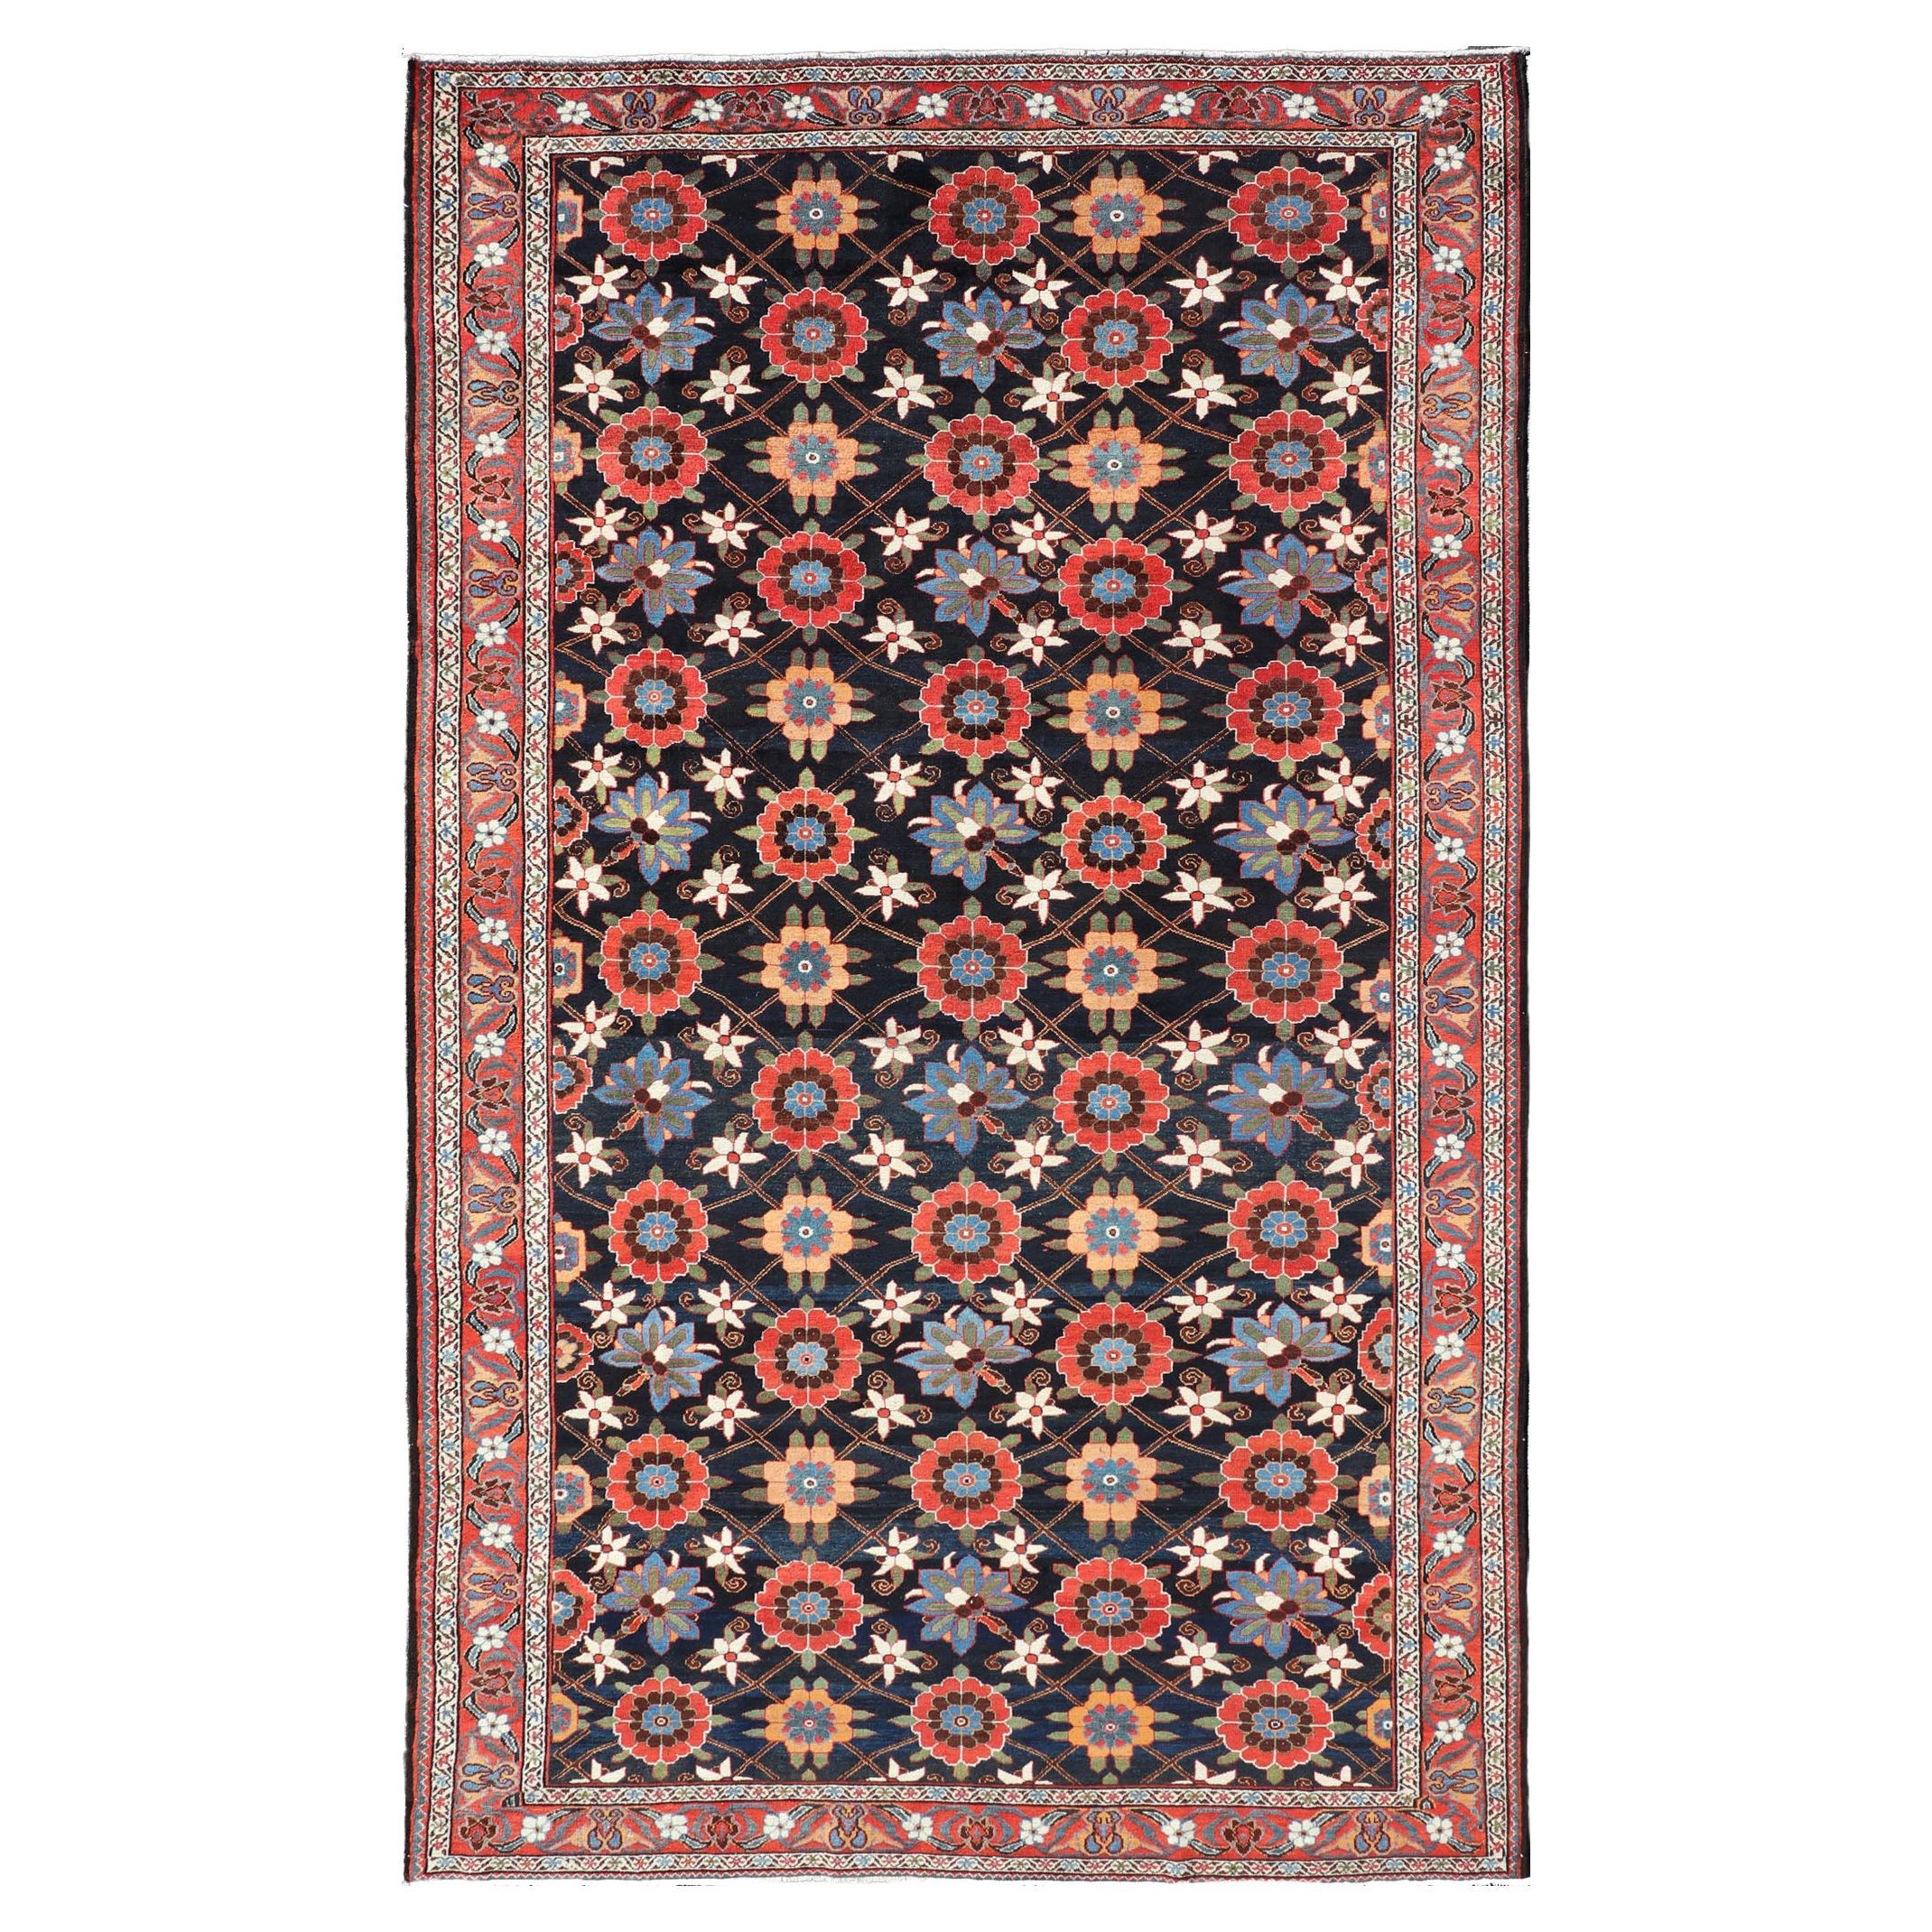 Wool Handknotted Antique Persian Gallery Bakhitari Rug in All-Over Floral Design For Sale